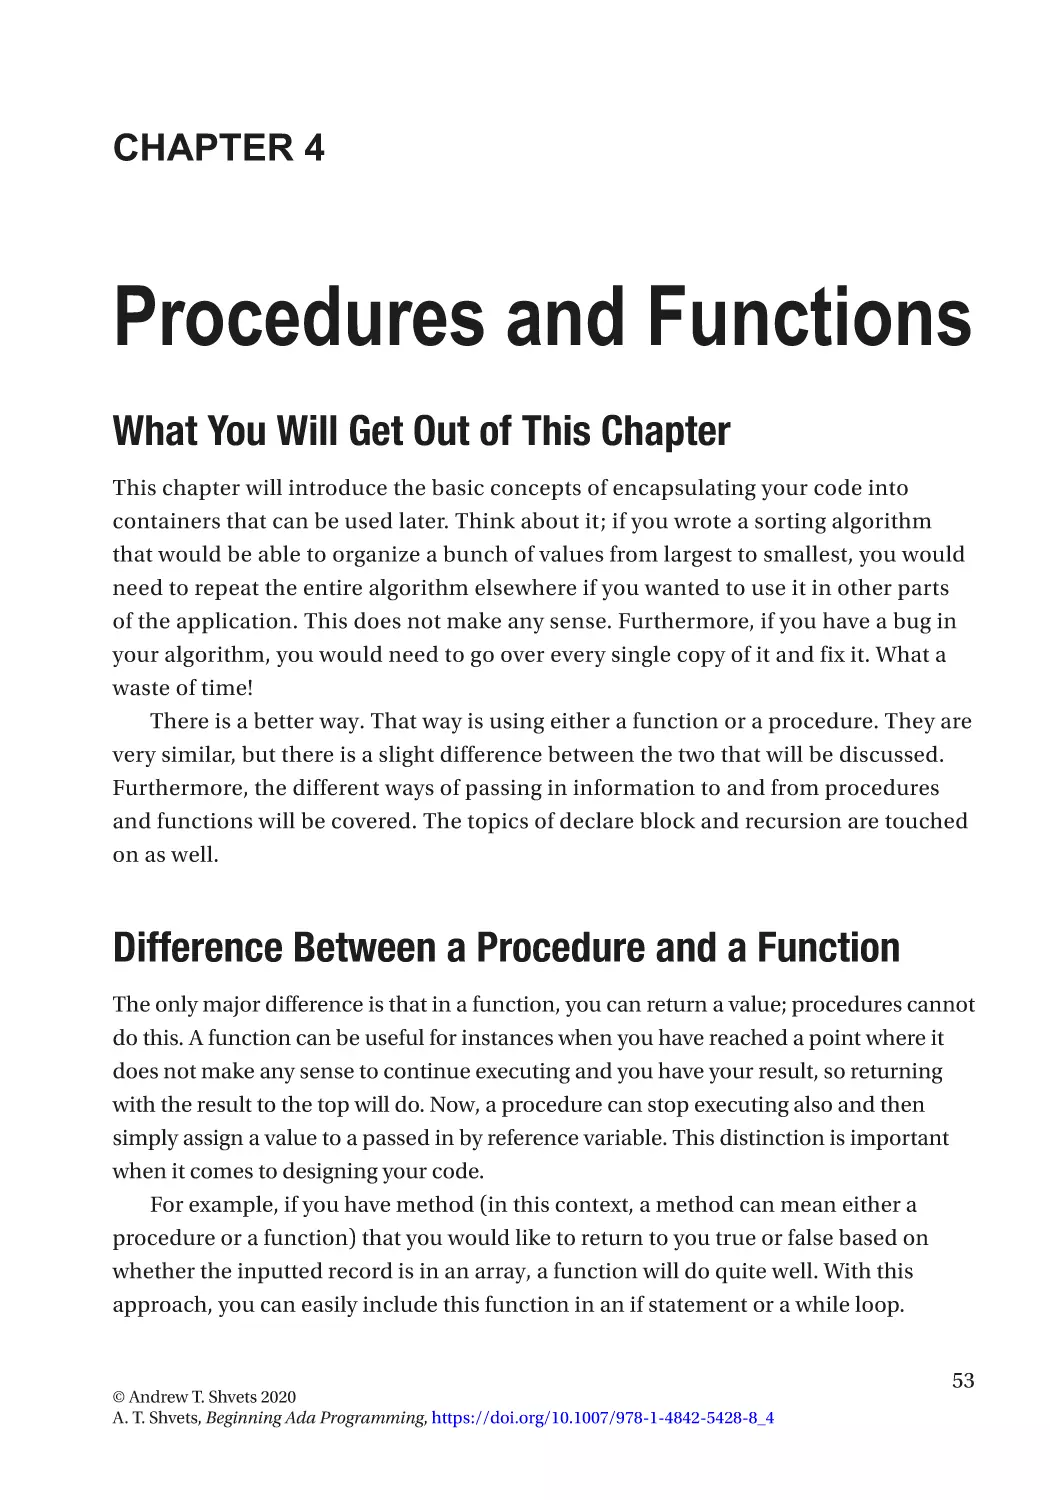 Chapter 4
What You Will Get Out of This Chapter
Difference Between a Procedure and a Function